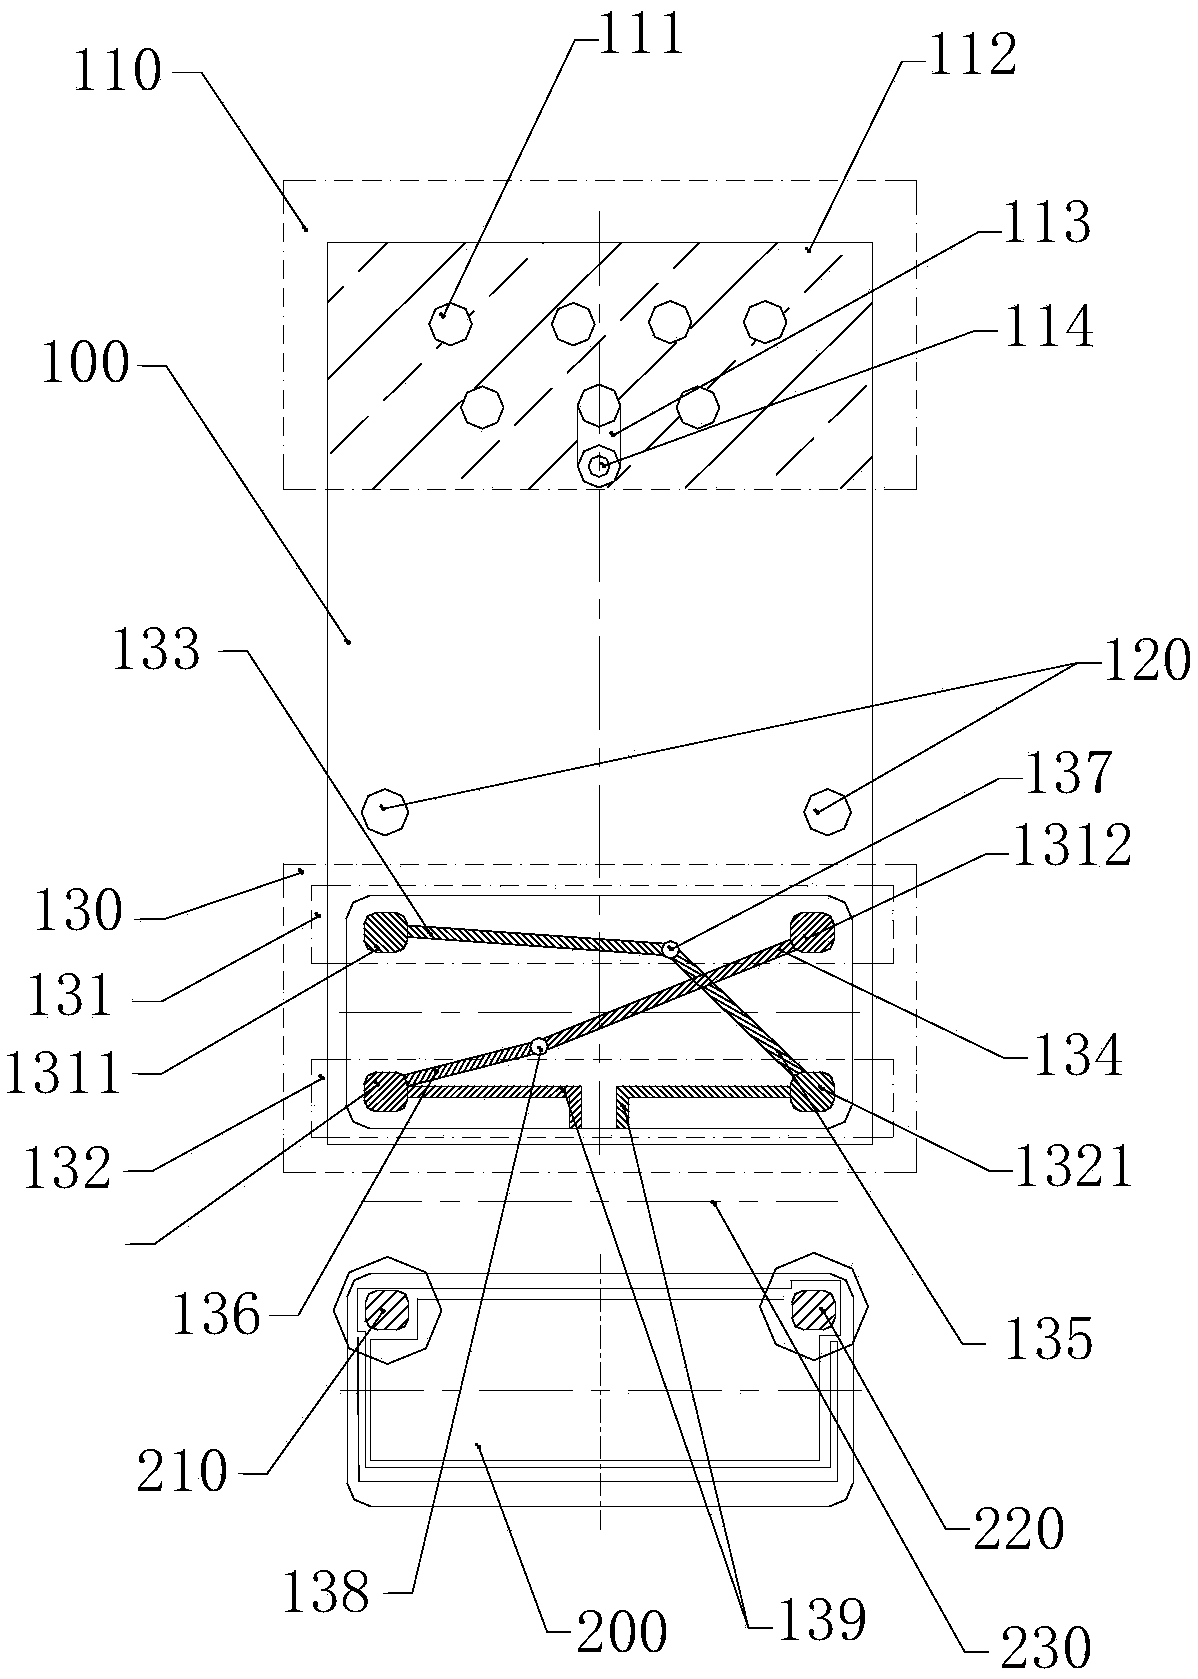 A flexible board easy to assemble a circuit board and an assembling system thereof